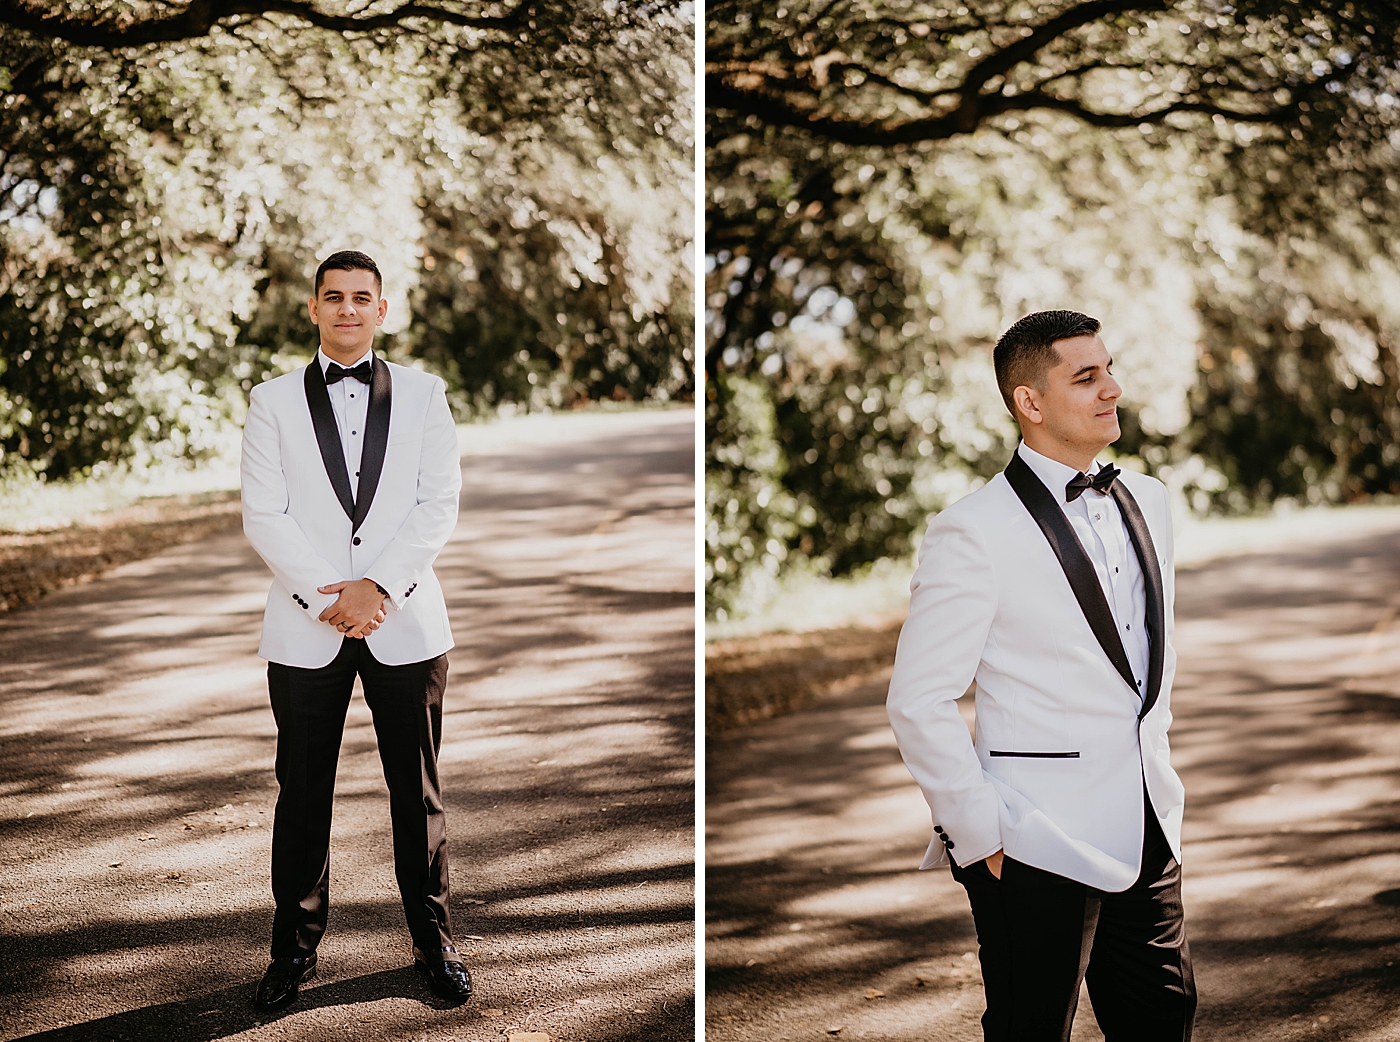 Portrait of Groom in white suit Lavan Venue Wedding Photography captured by South Florida Wedding Photographer Krystal Capone Photography